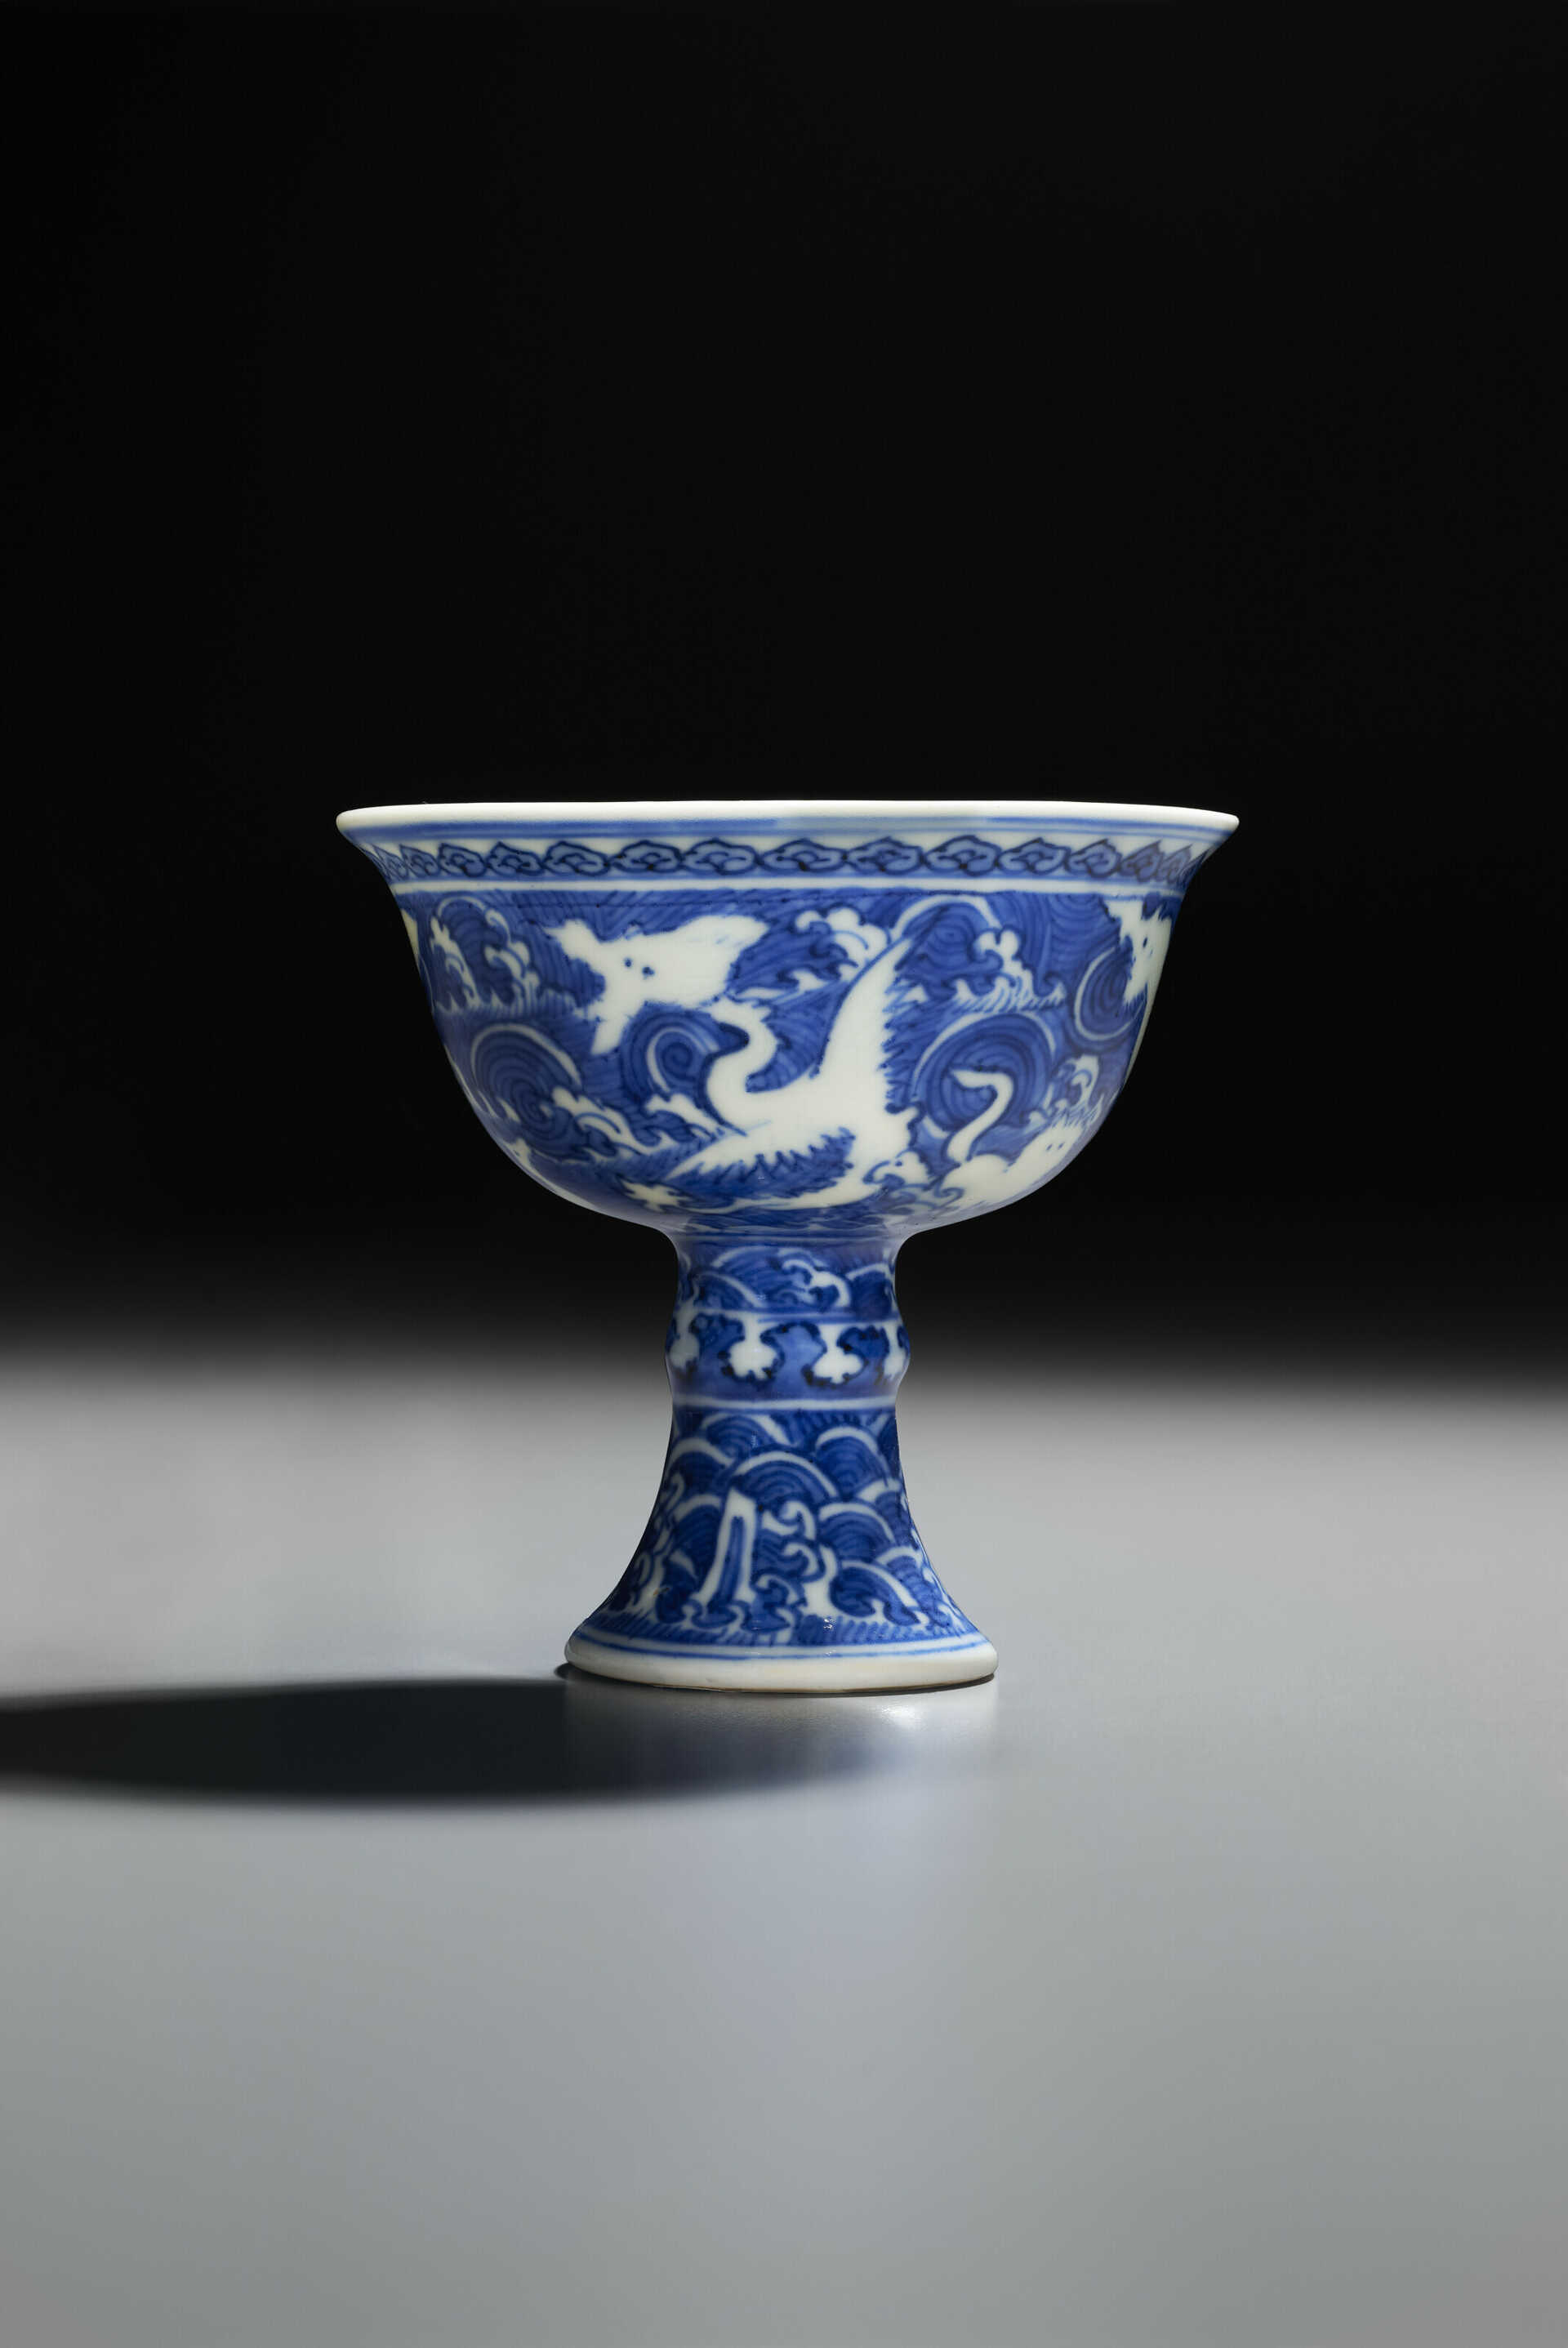 A VERY RARE BLUE AND WHITE REVERSE-DECORATED STEM CUP